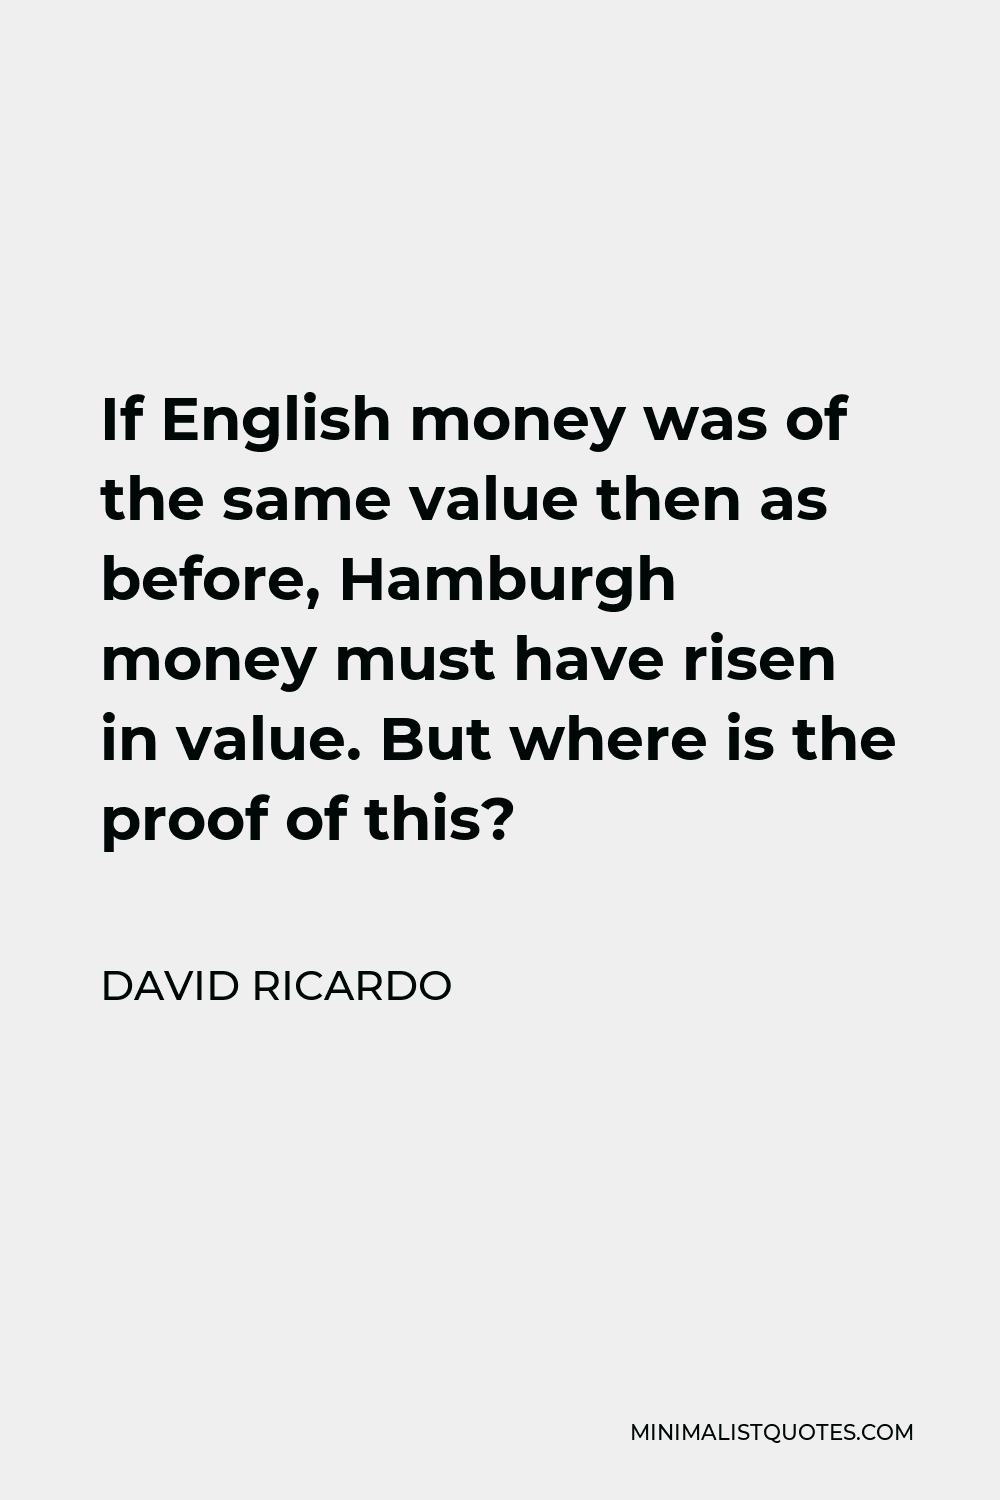 David Ricardo Quote - If English money was of the same value then as before, Hamburgh money must have risen in value. But where is the proof of this?